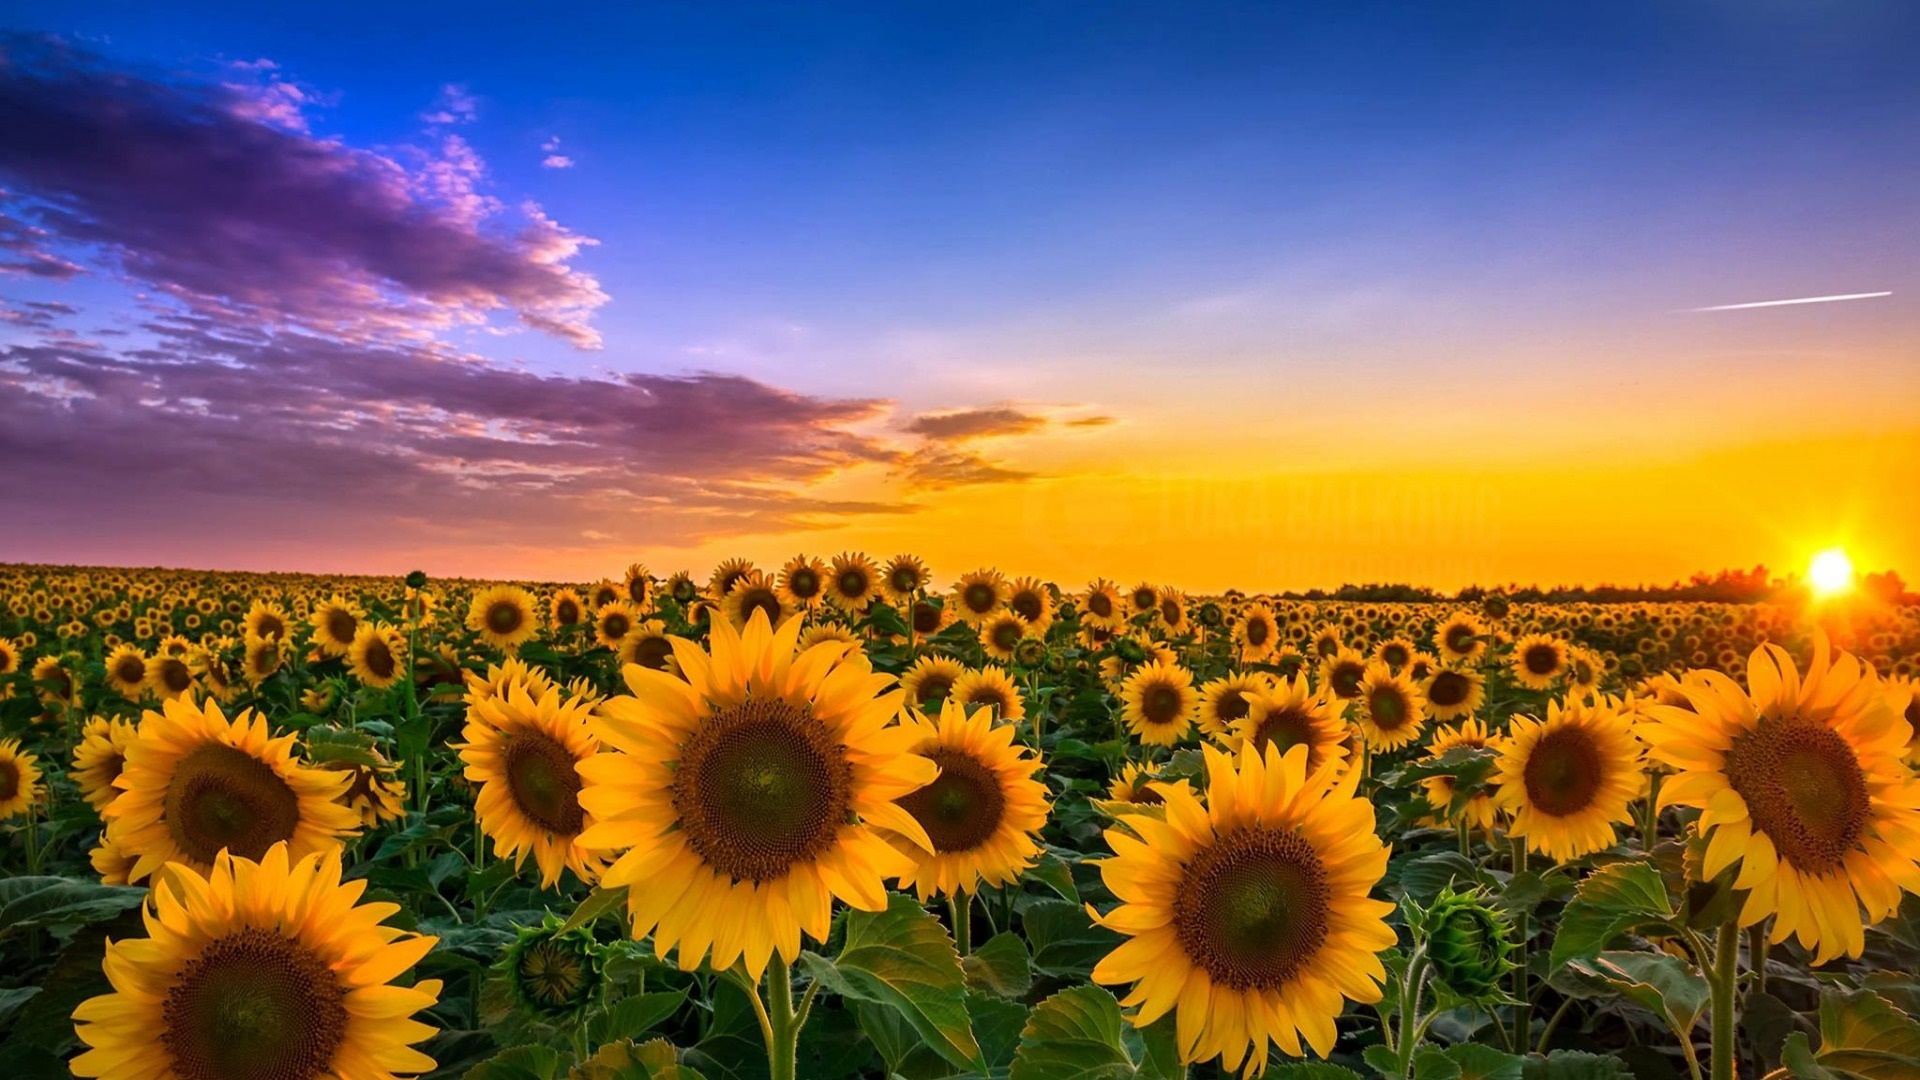 Sunflowers In The Sunrise Backiee